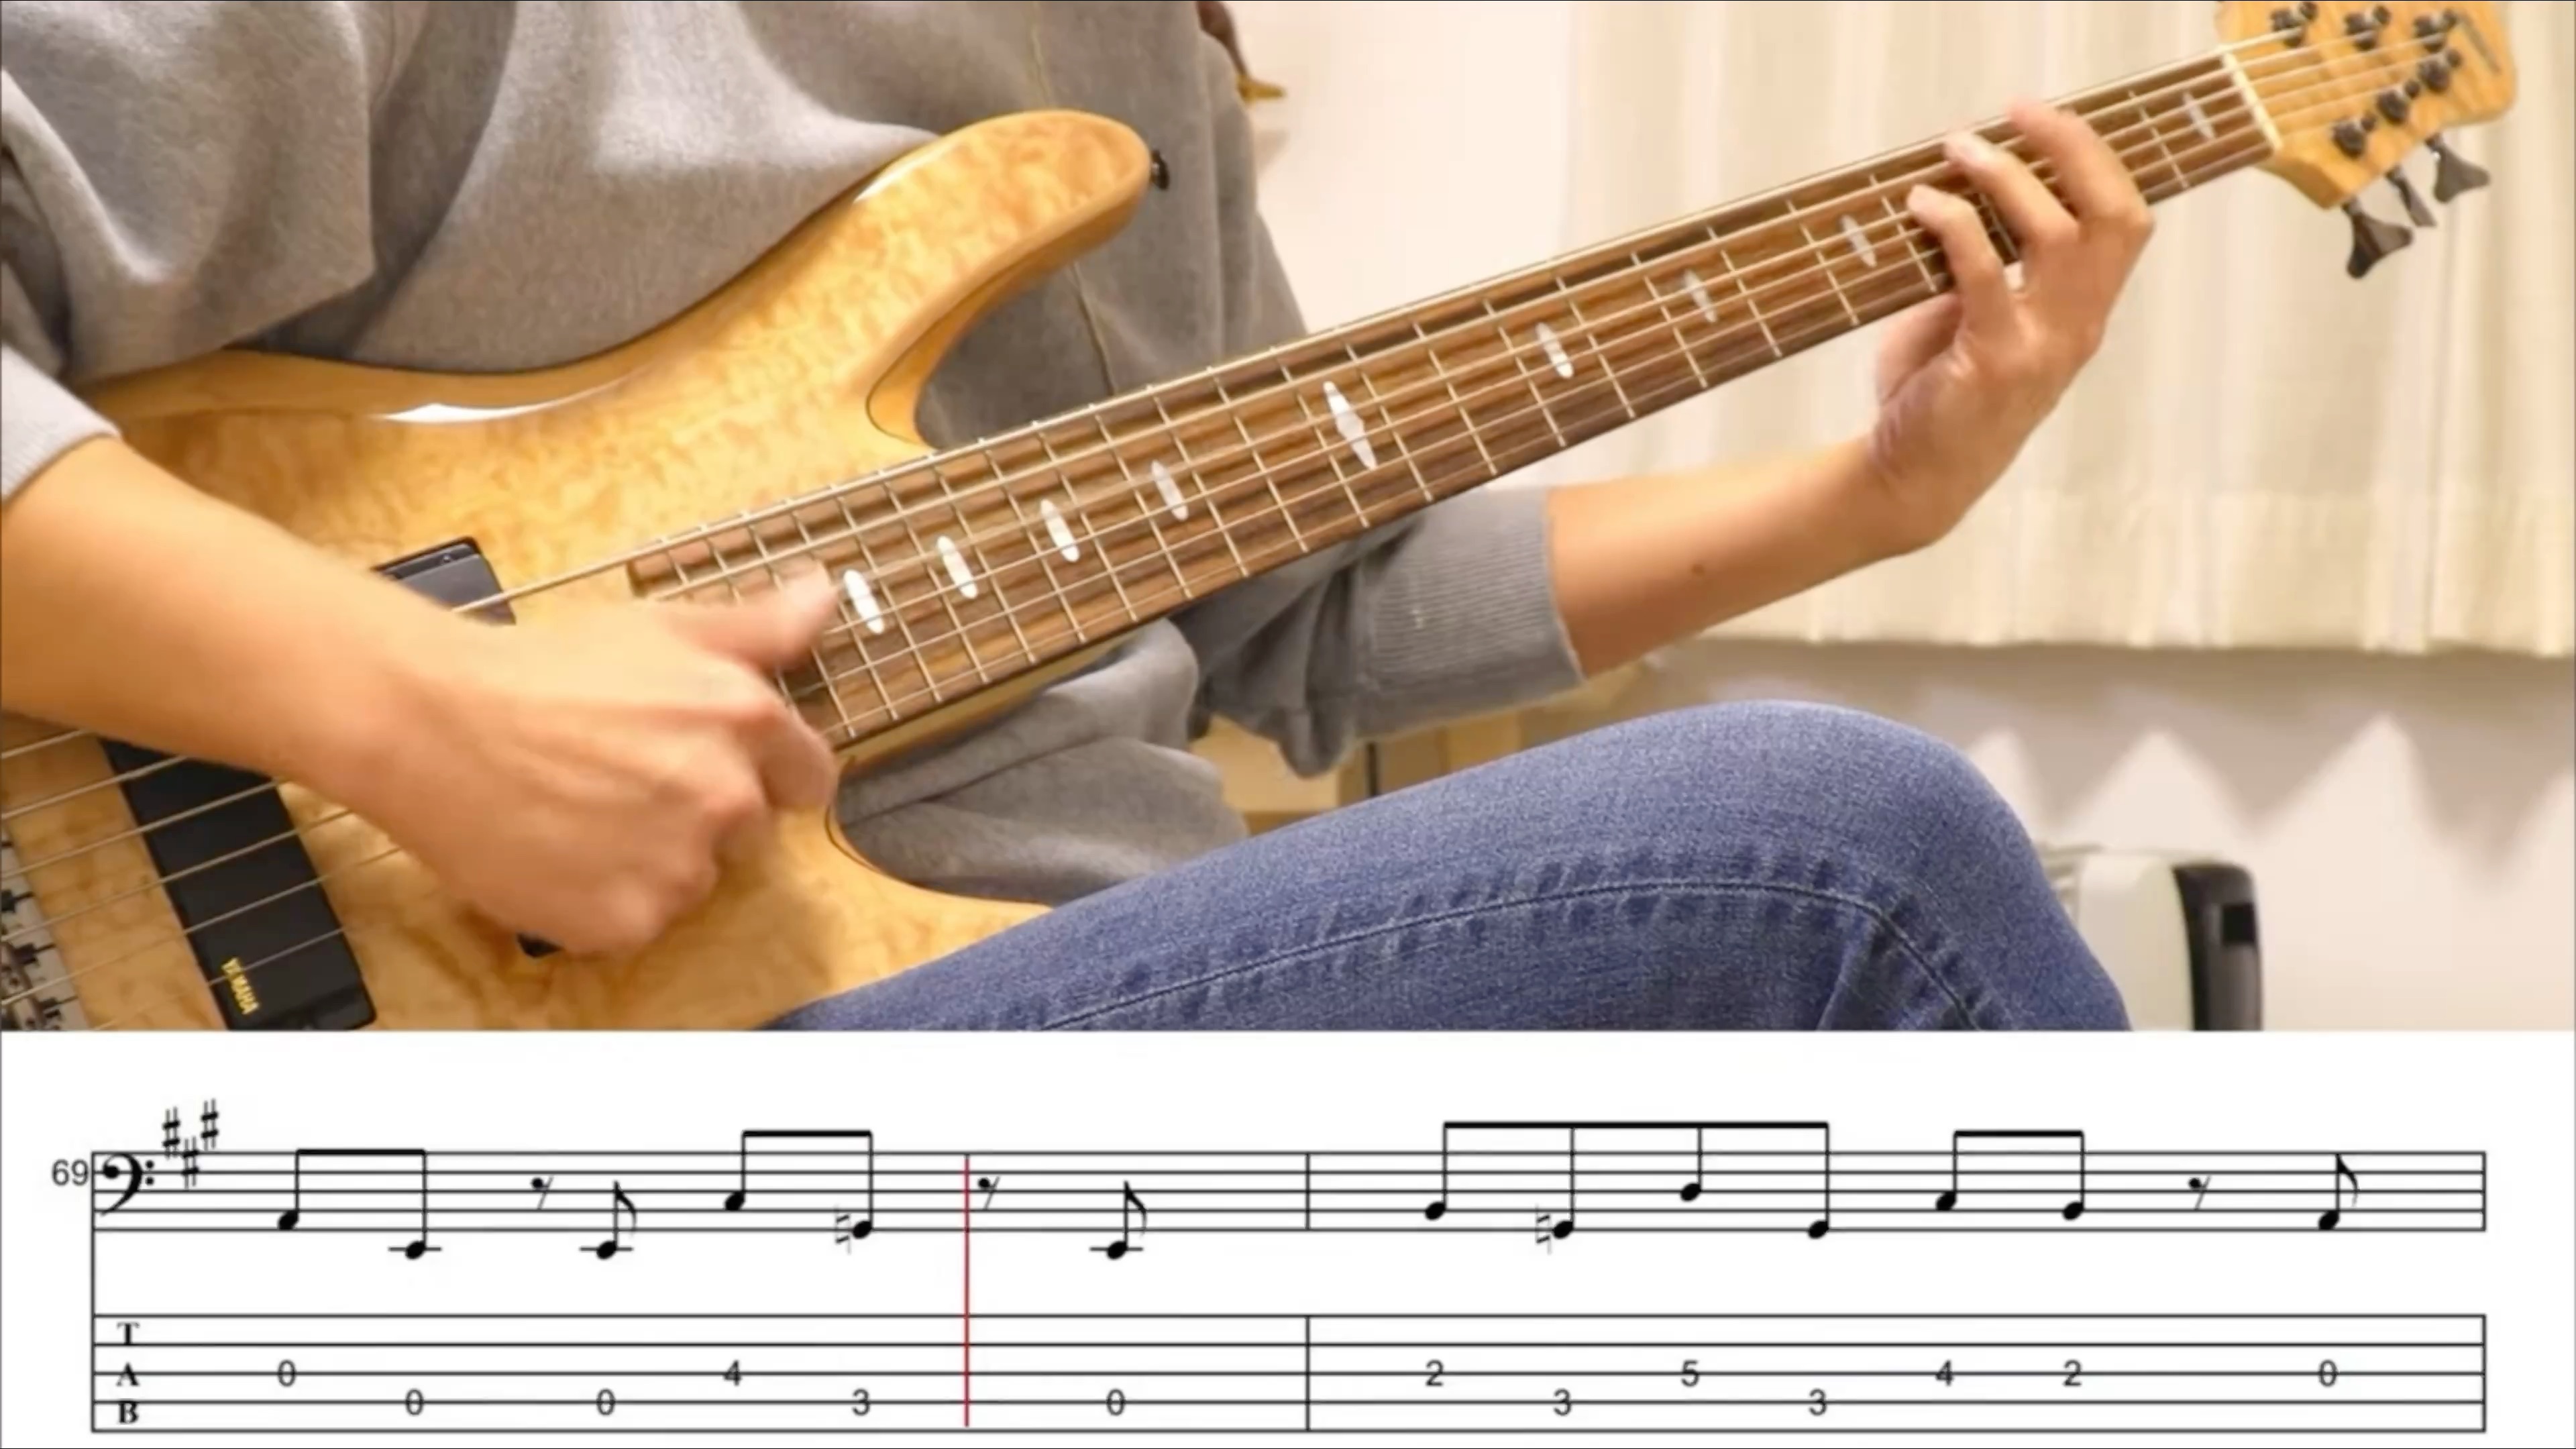 『Casiopea』Casiopea - Halle [Bass Cover) with Tabs